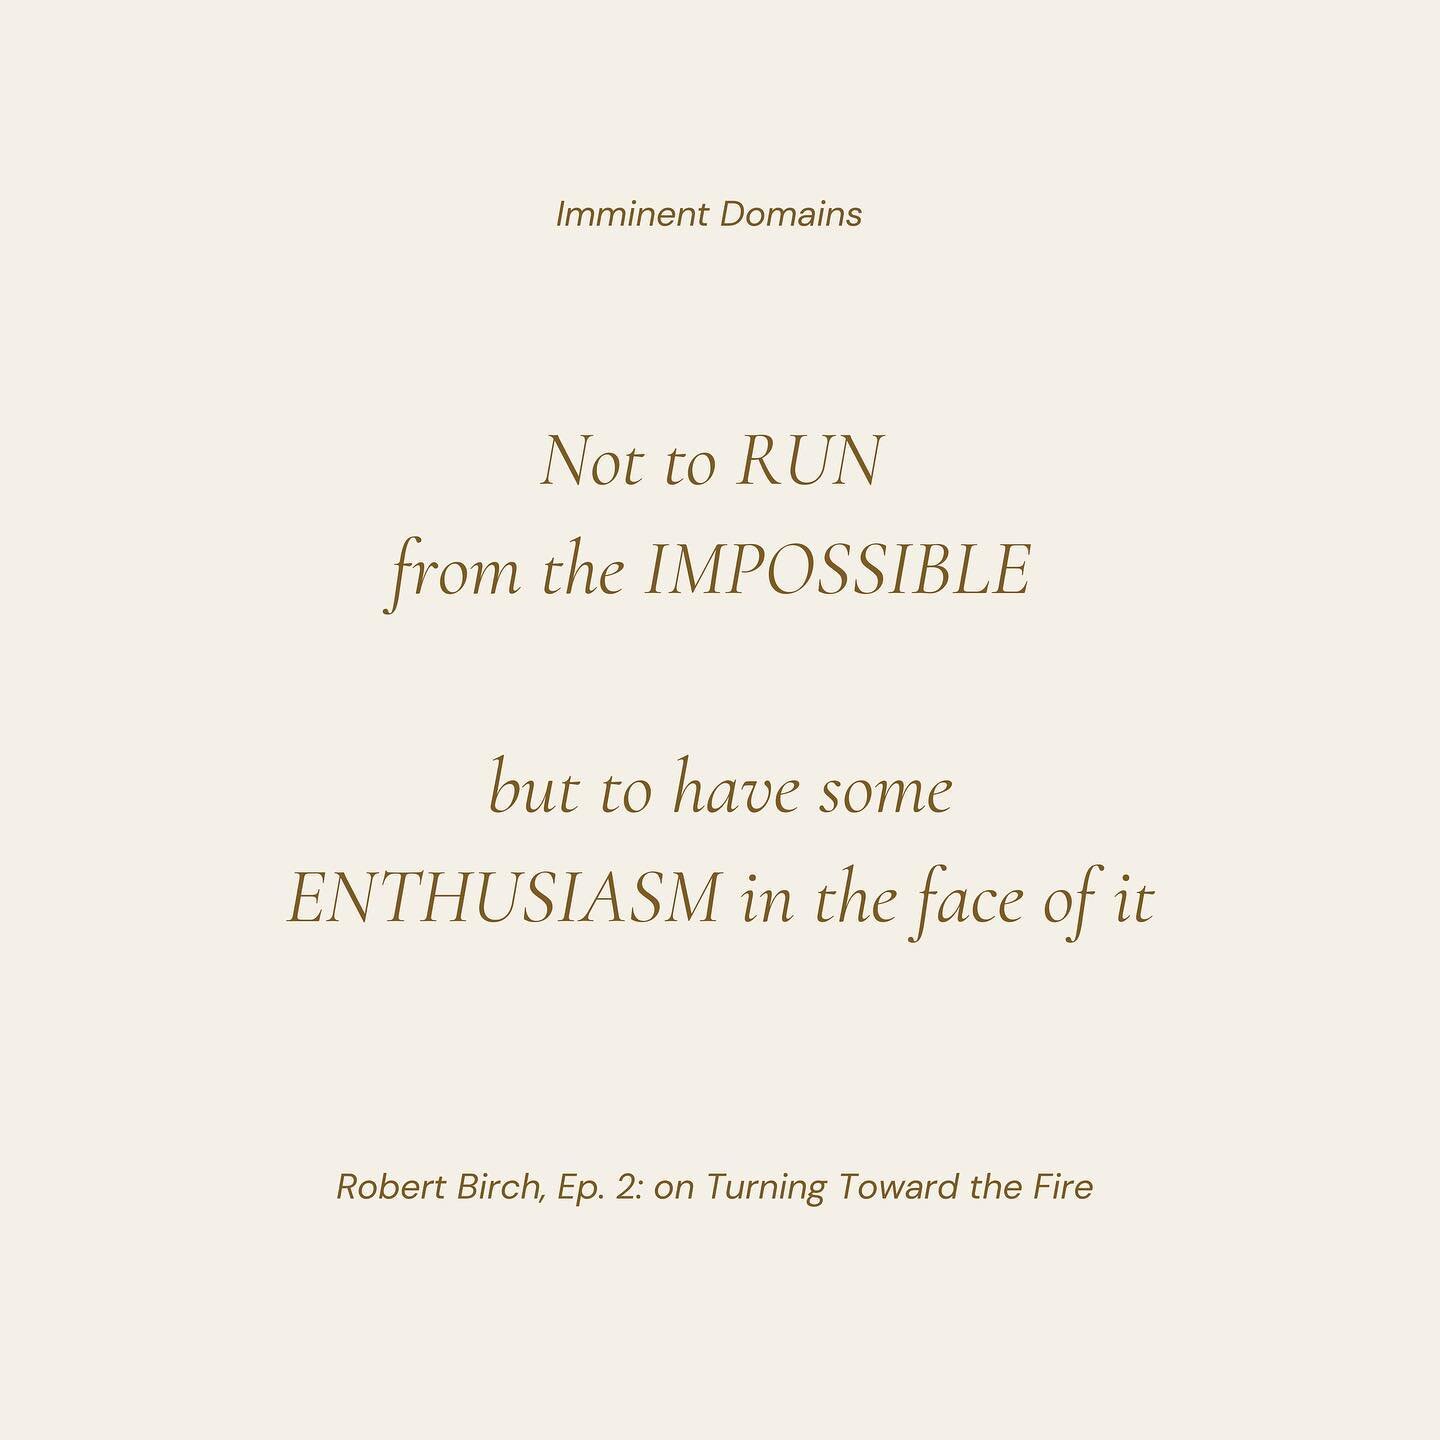 Robert Birch on Turning Toward the Fire, from Imminent Domains, Ep. 2 🔥 Speaking to community efforts in the HIV/AIDS crisis, and what is possible in this world. 

Link in bio to watch | listen | follow the podcast 🌻

ID. 1. &ldquo;Not to run from 